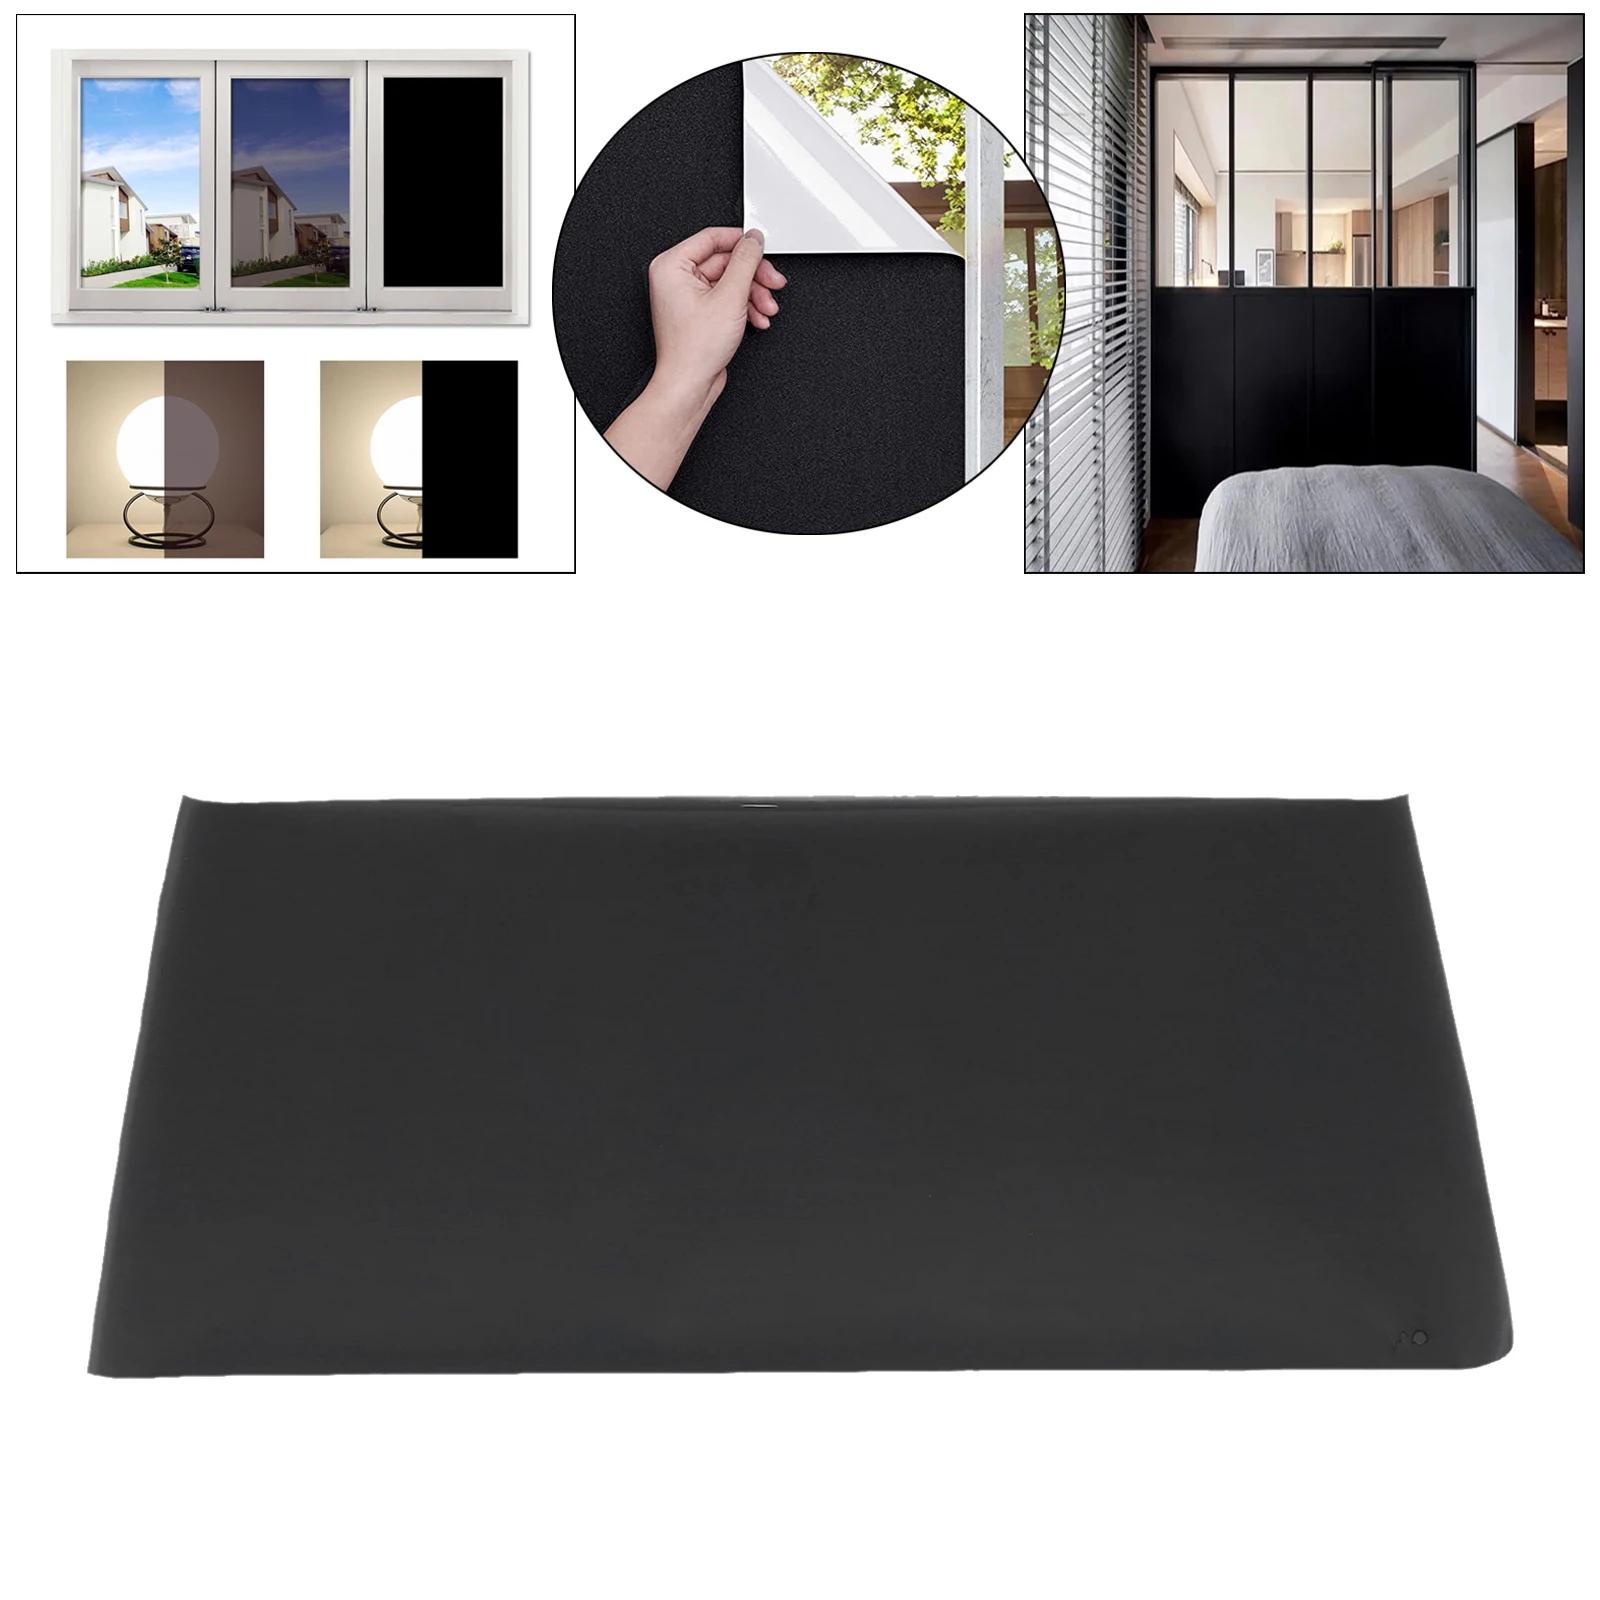 Static Cling Total Blackout Window Film Privacy Room Darkening Tint Black Cover for sale online 